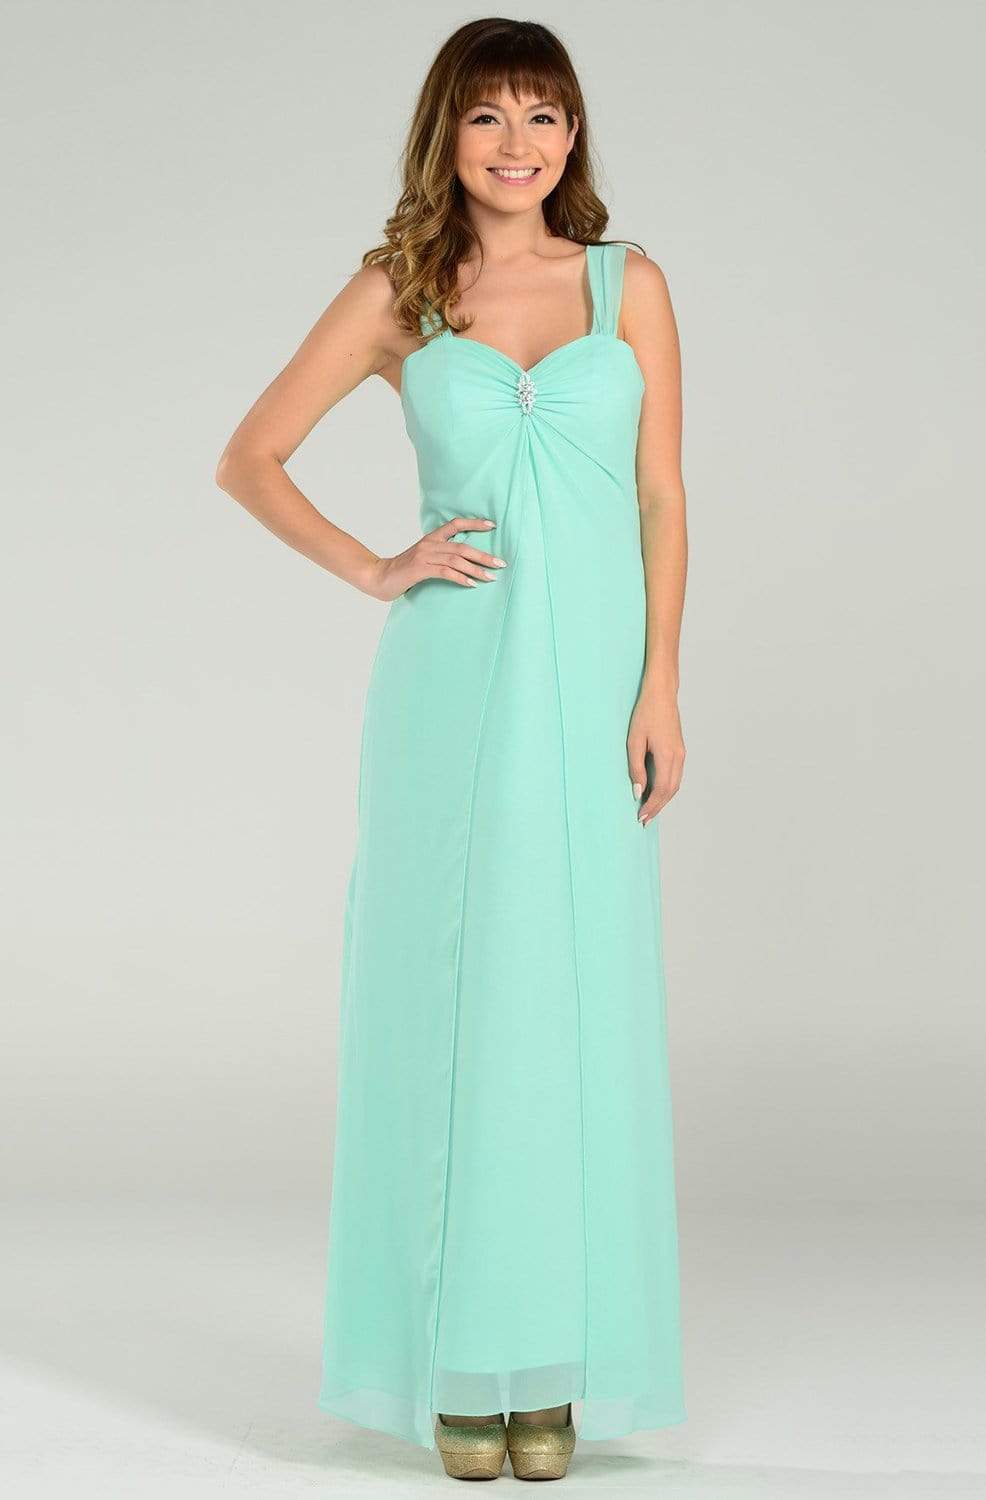 Poly USA - 7000 Sleeveless Sweetheart Chiffon Gown with Overlay
